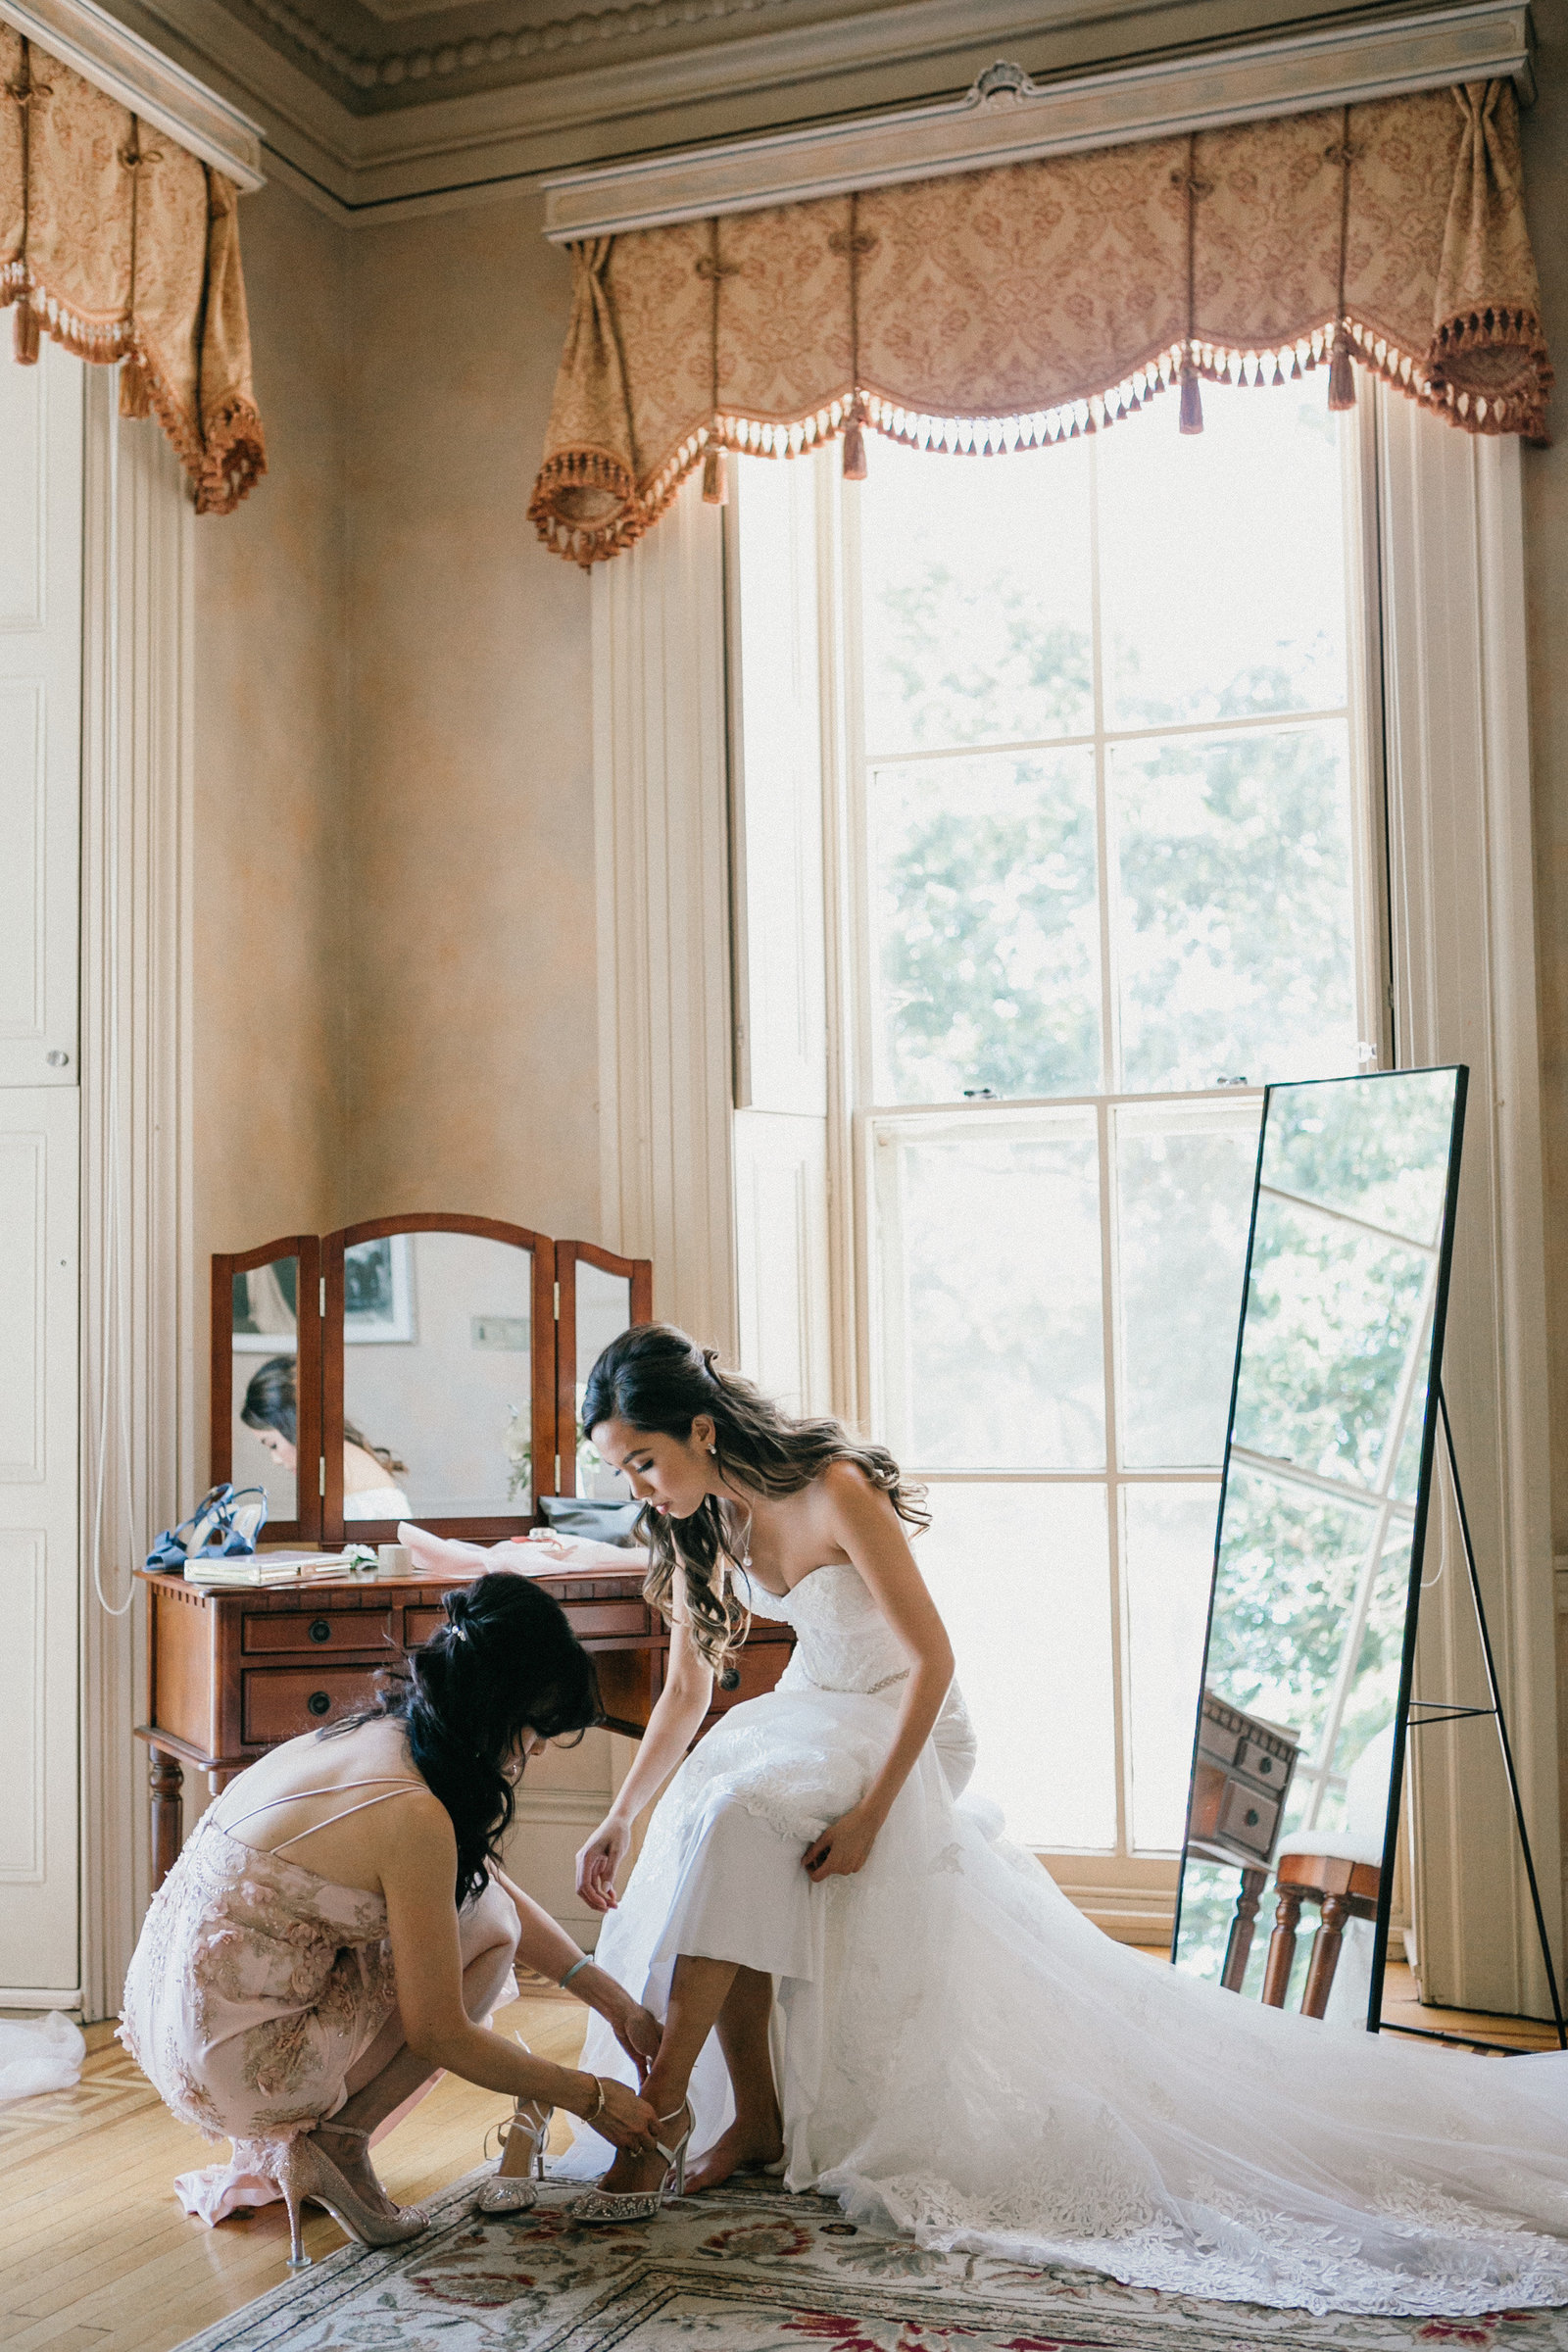 Gorgeous bride, Tascha getting ready in one of the rooms at the historic Glen Foerd Mansion in Philadelphia.